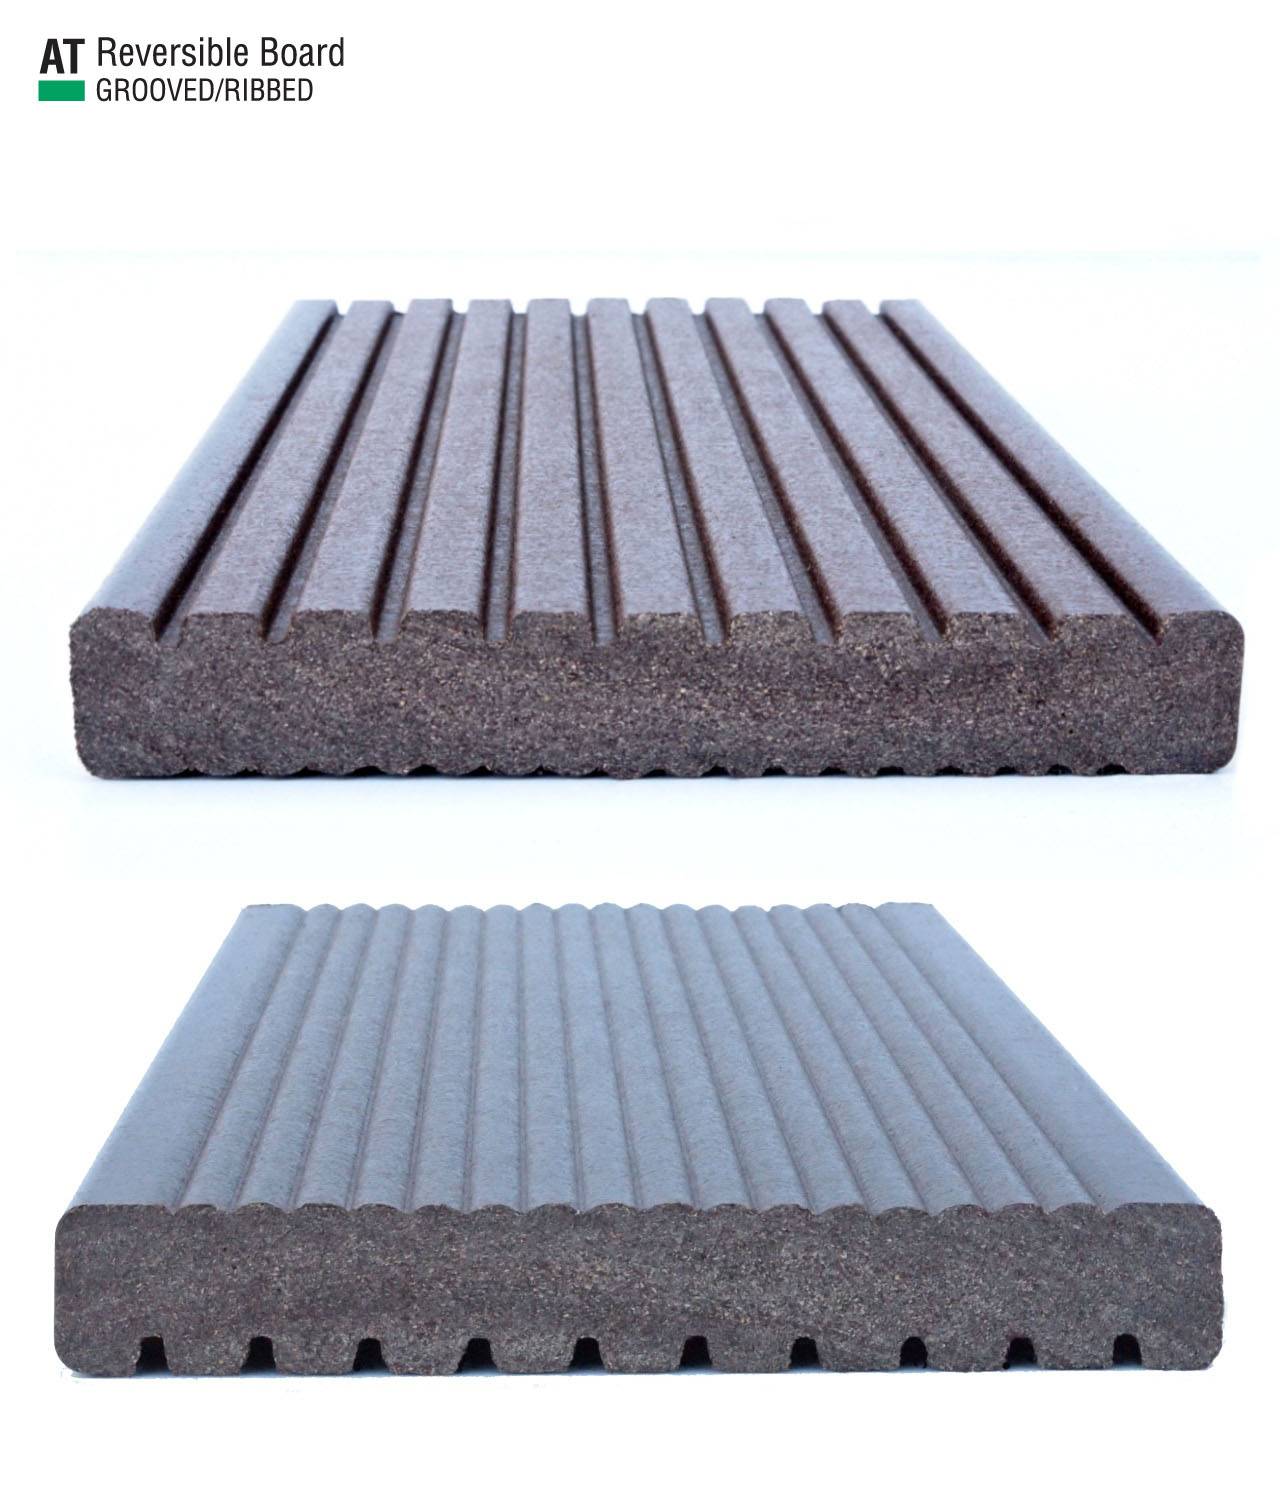 ecodek® Reversible Composite Decking Board - Advanced Technology (AT)